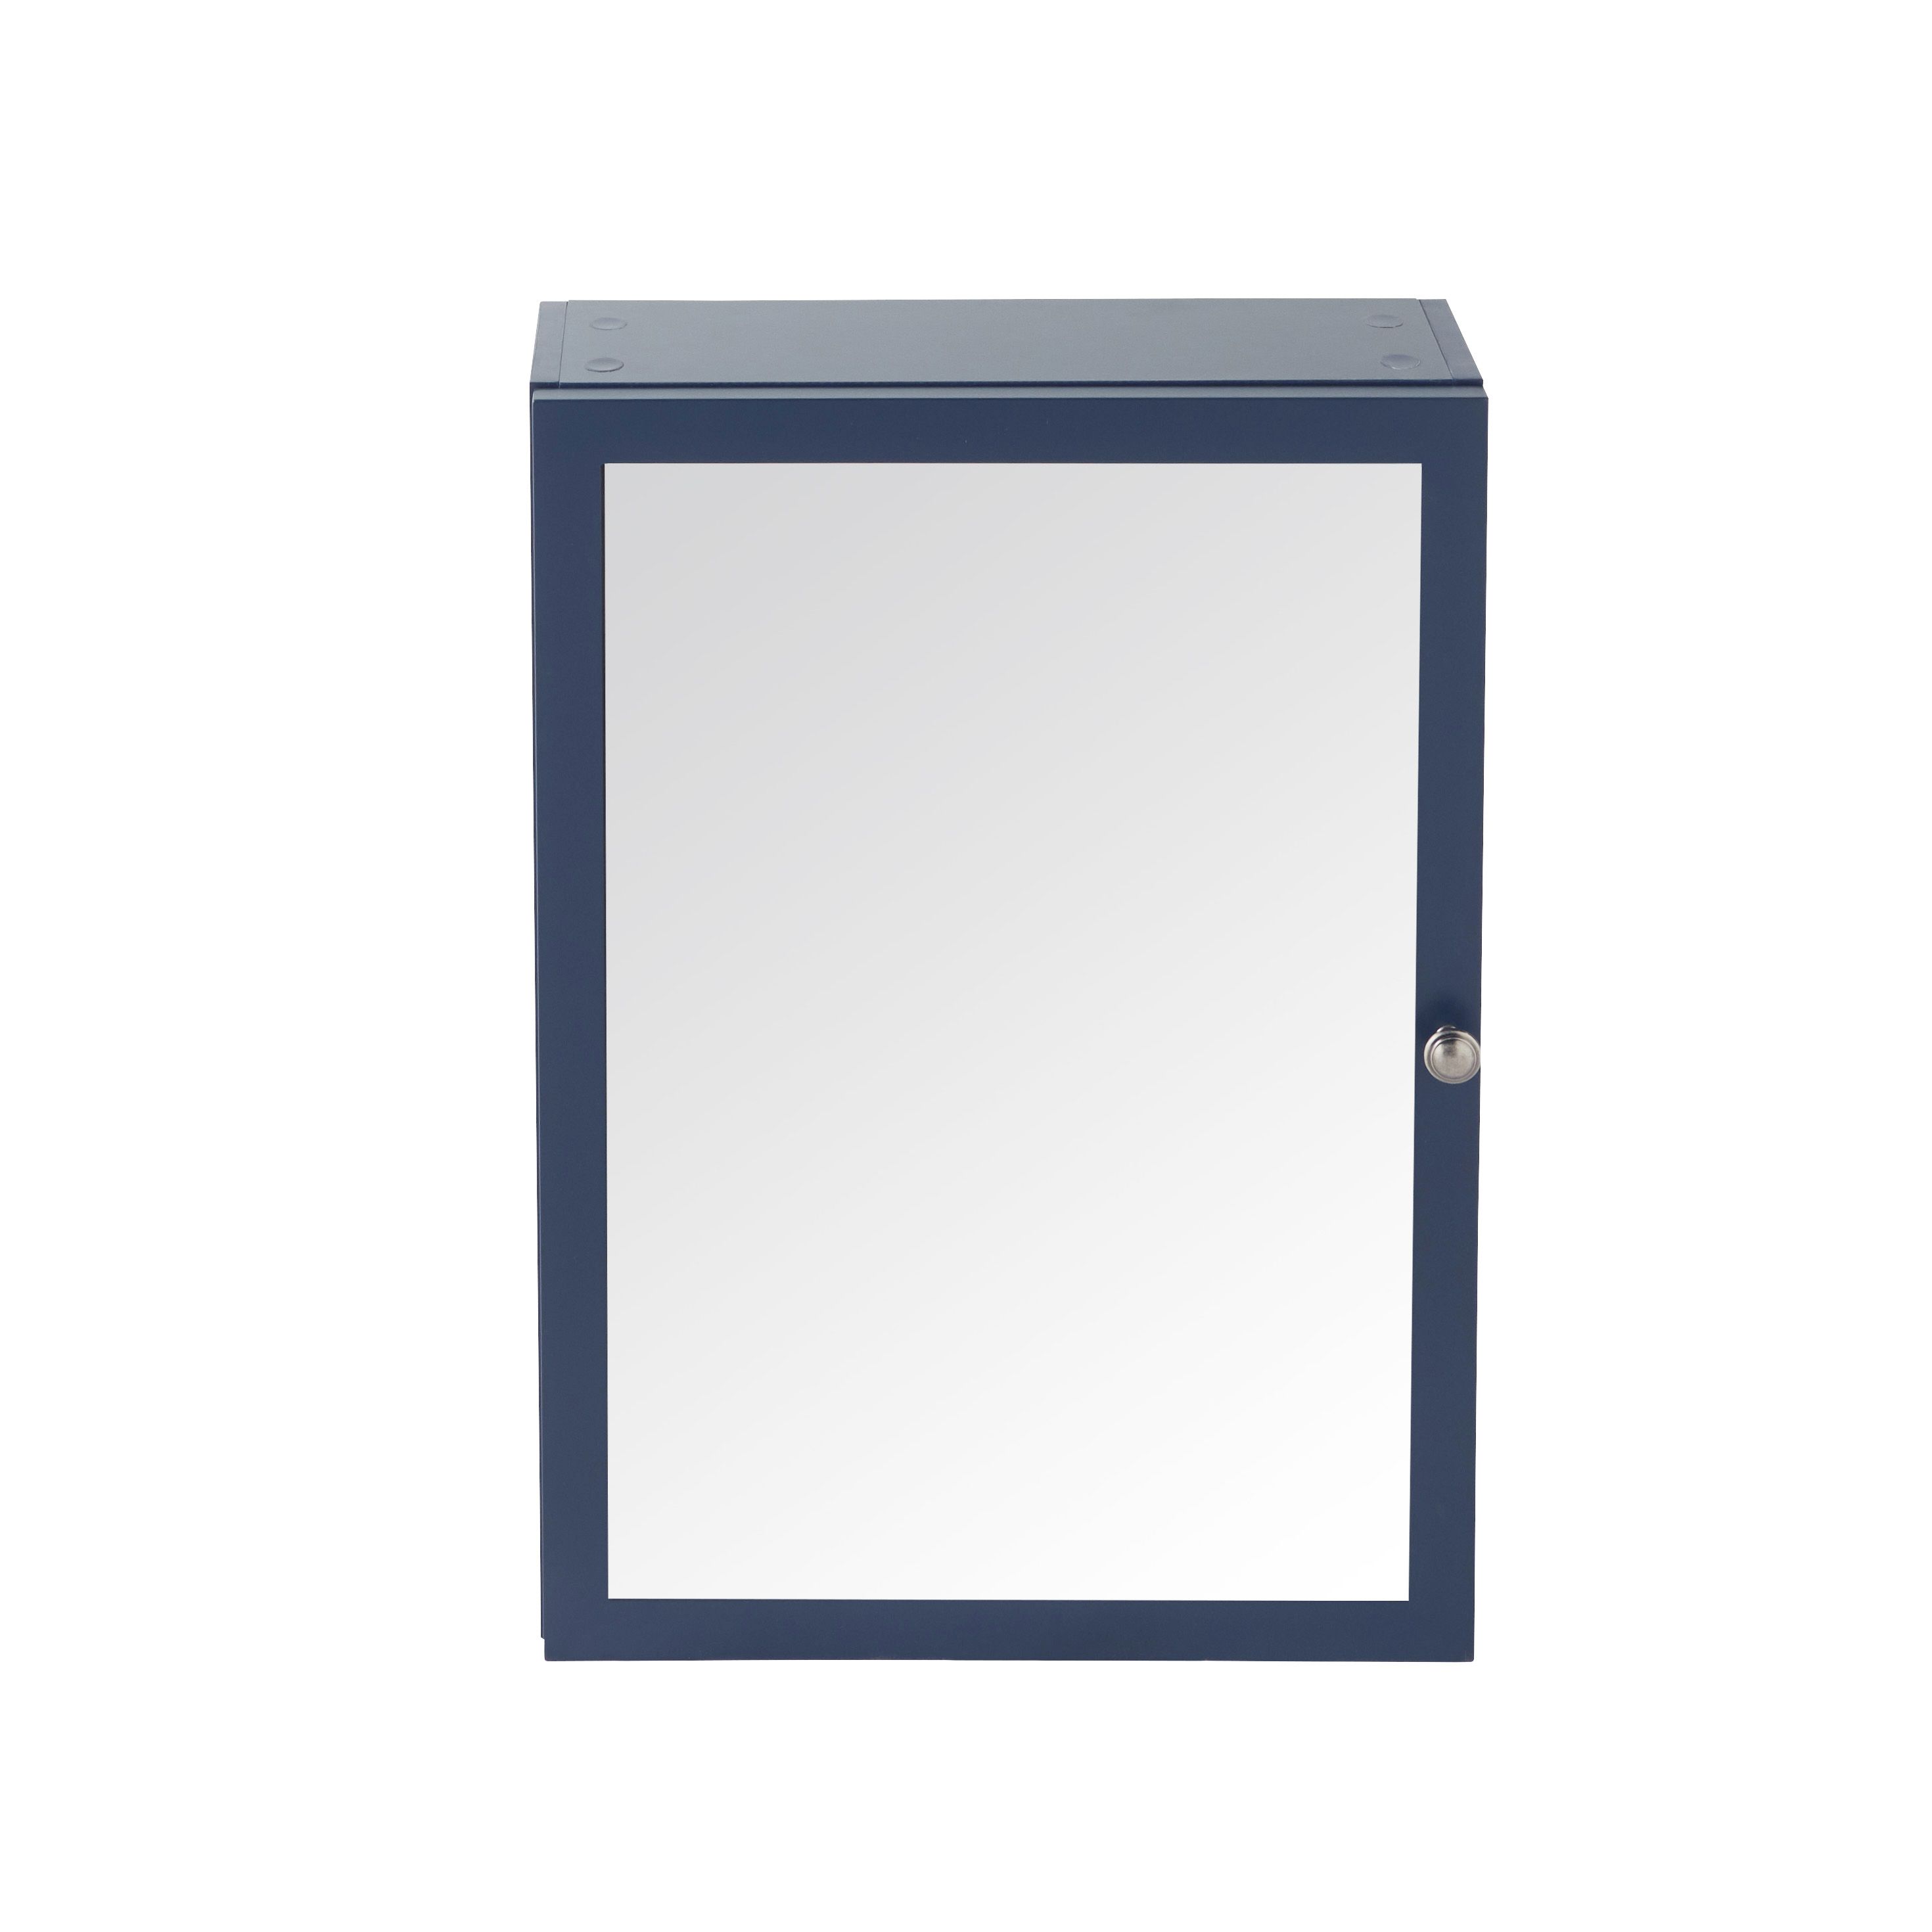 GoodHome Perma Satin Navy Wall-mounted Single Bathroom Cabinet with Mirrored door (W)500mm (H)700mm